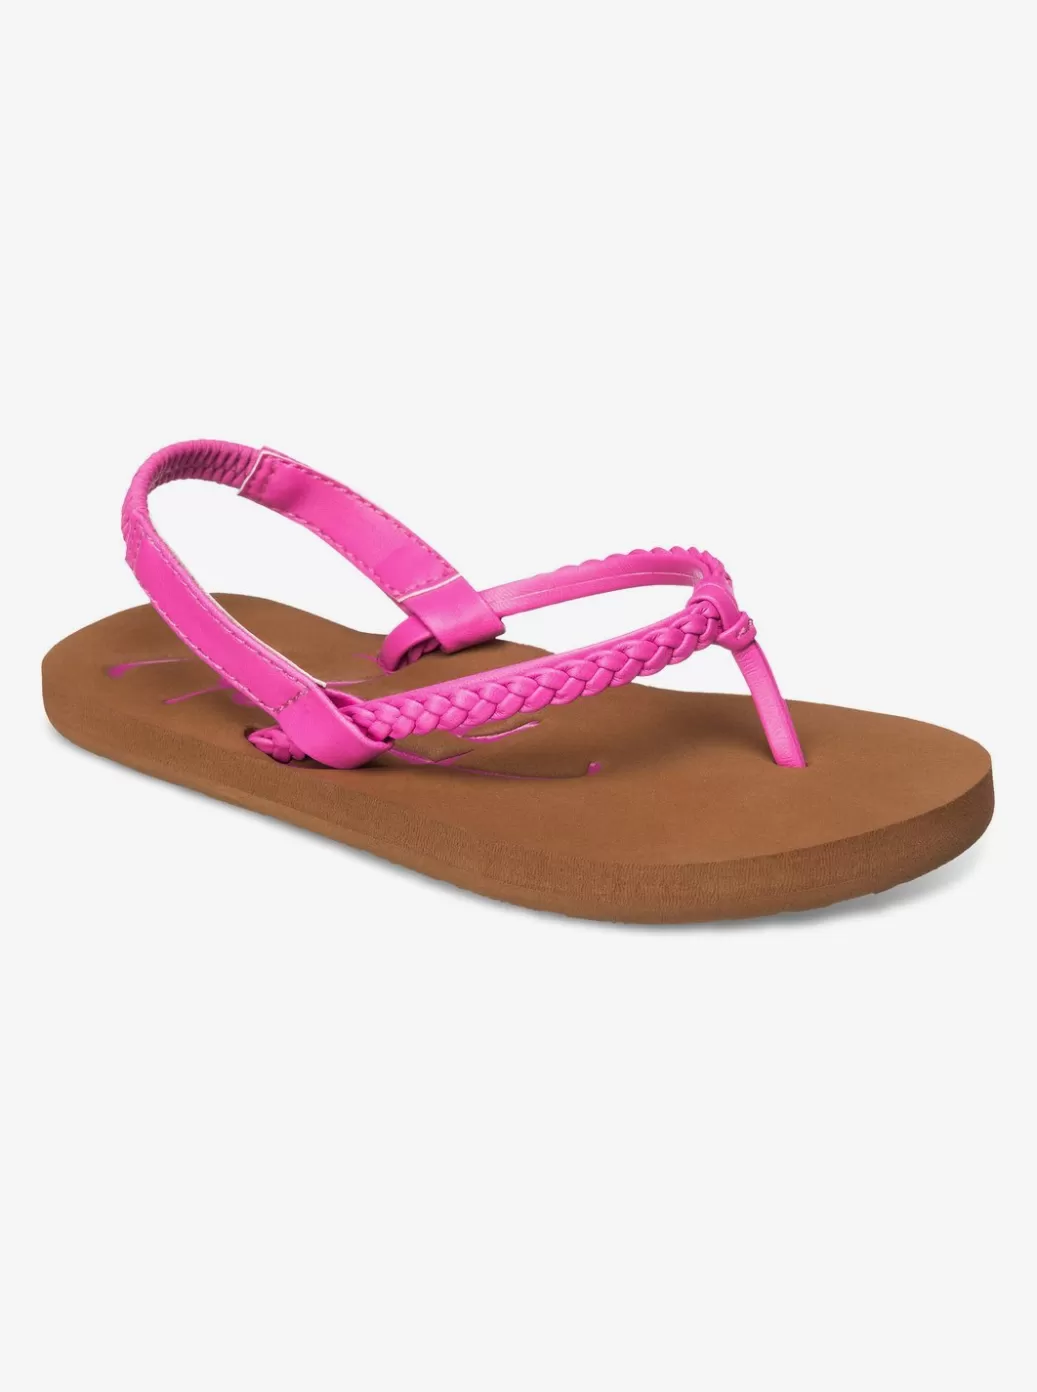 Shoes & Sandals | KIDS ROXY Girl's 2-7 Cabo Sandals Hot Pink